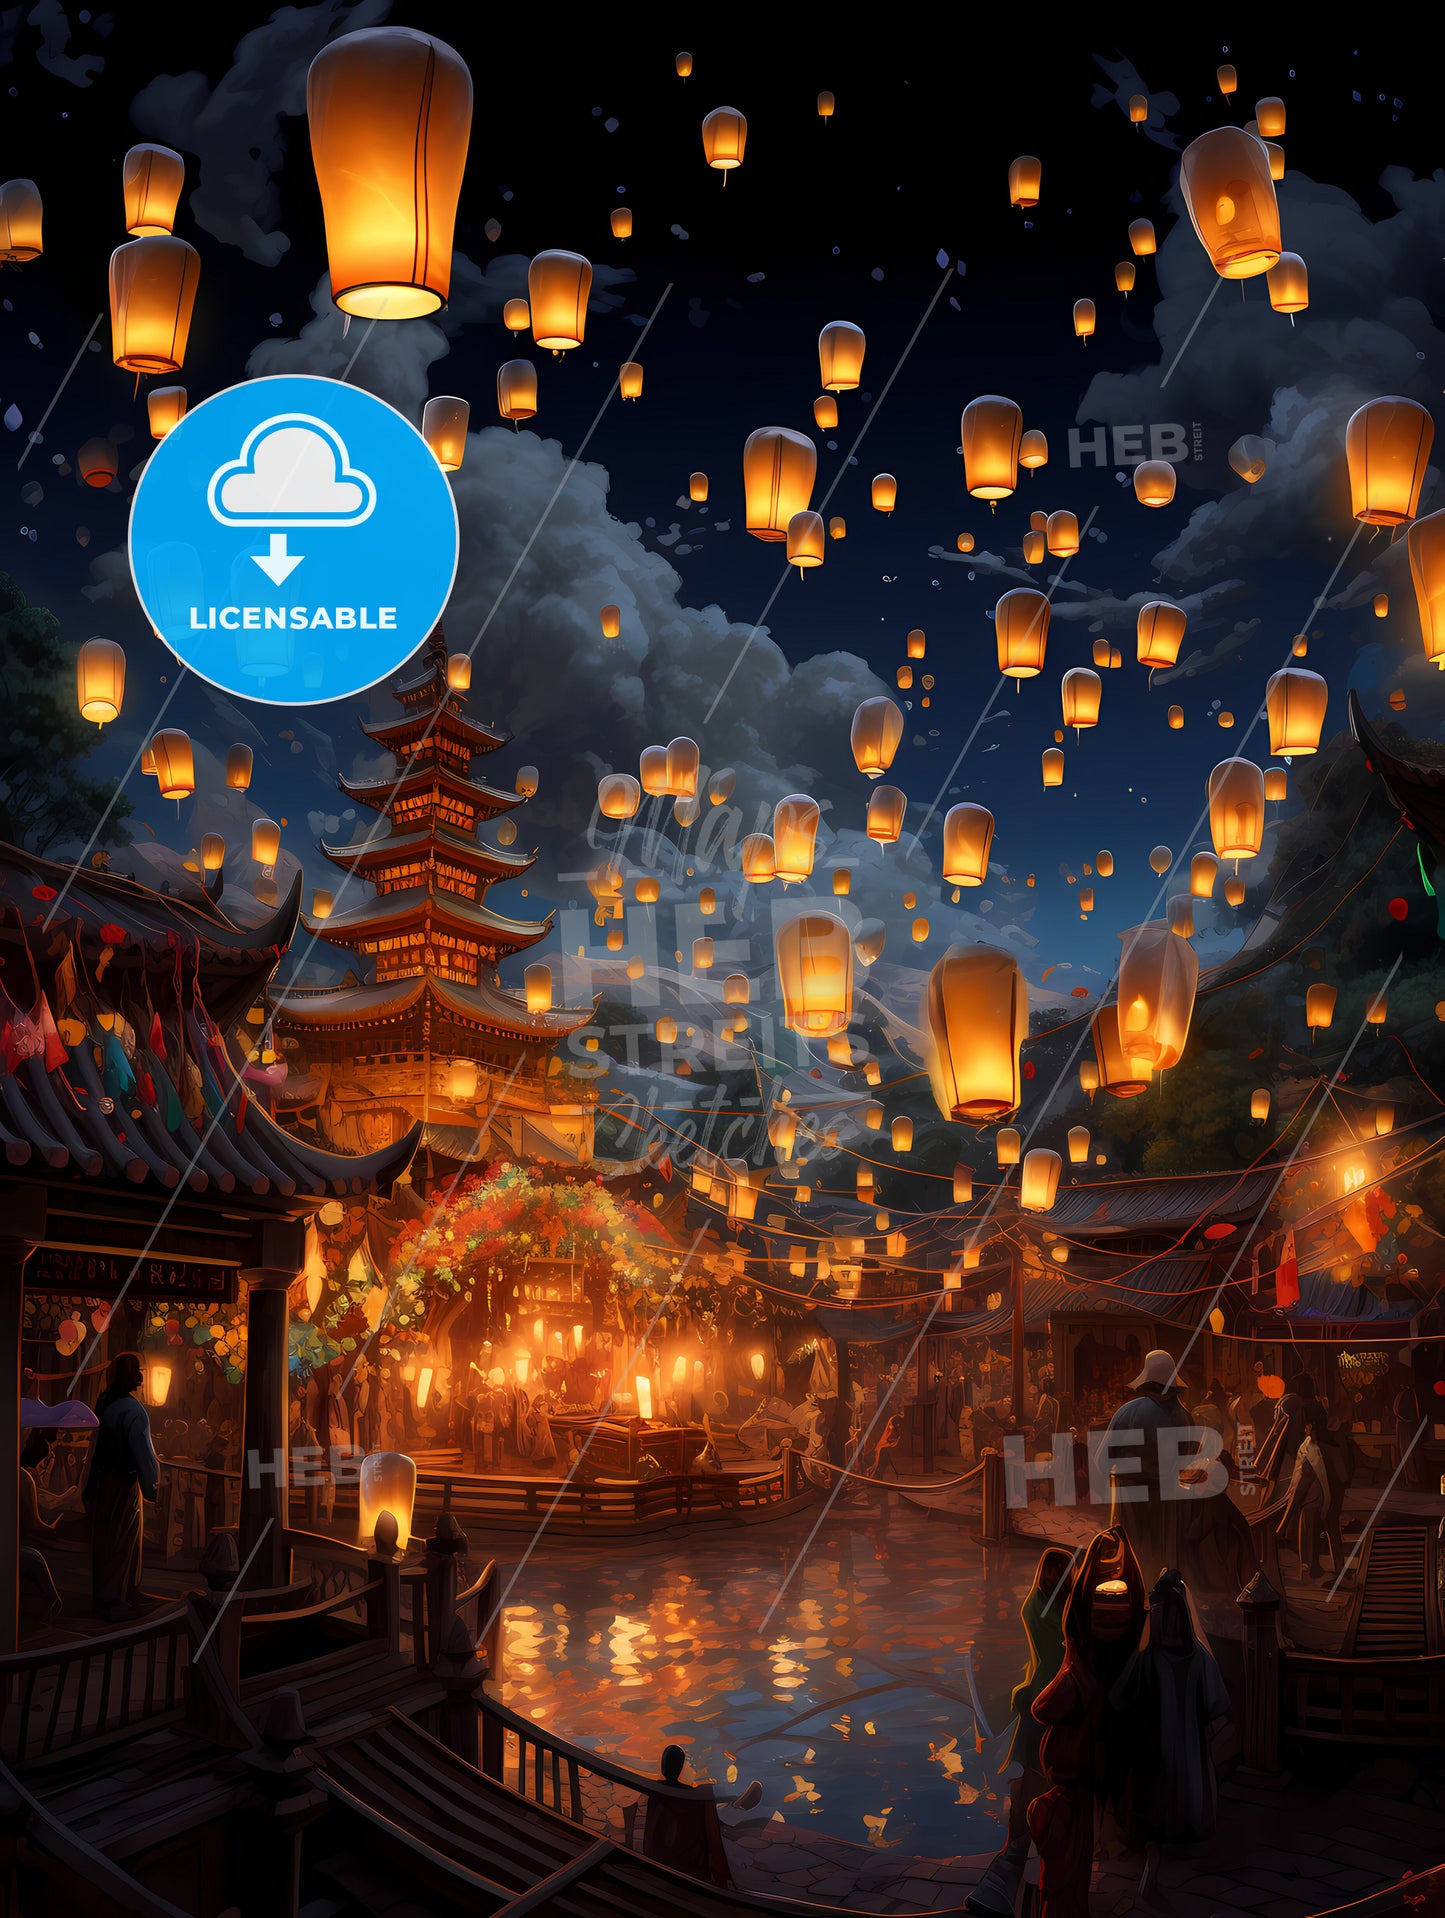 Celebration Scene With 100 Lanterns, A Building With Lanterns In The Sky